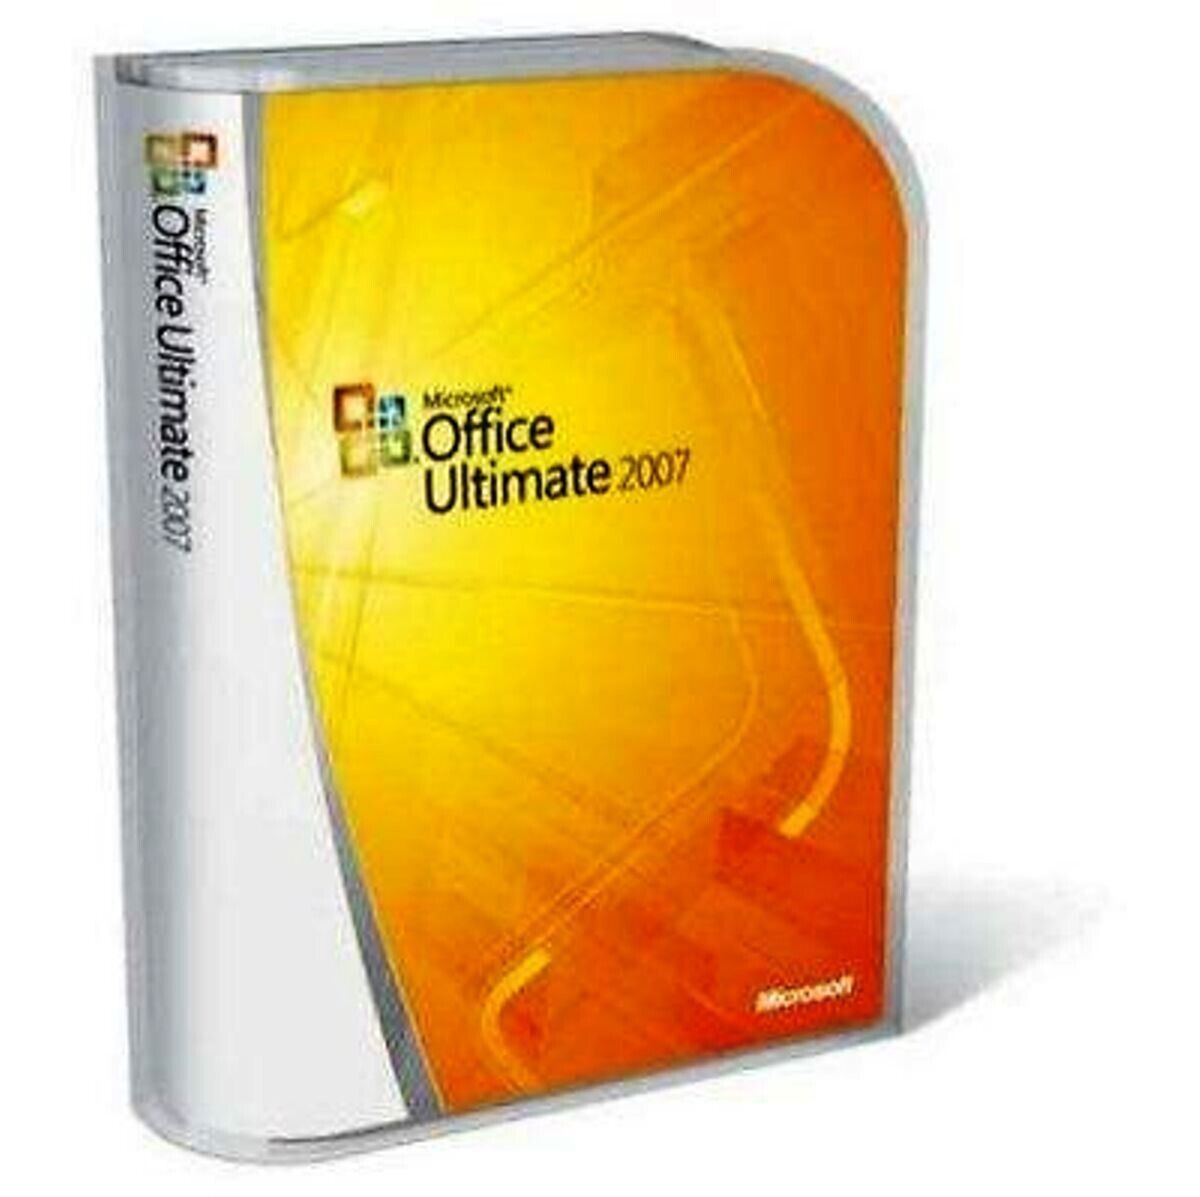 Microsoft Office Ultimate 2007 & Project Visio Professional in Japanese